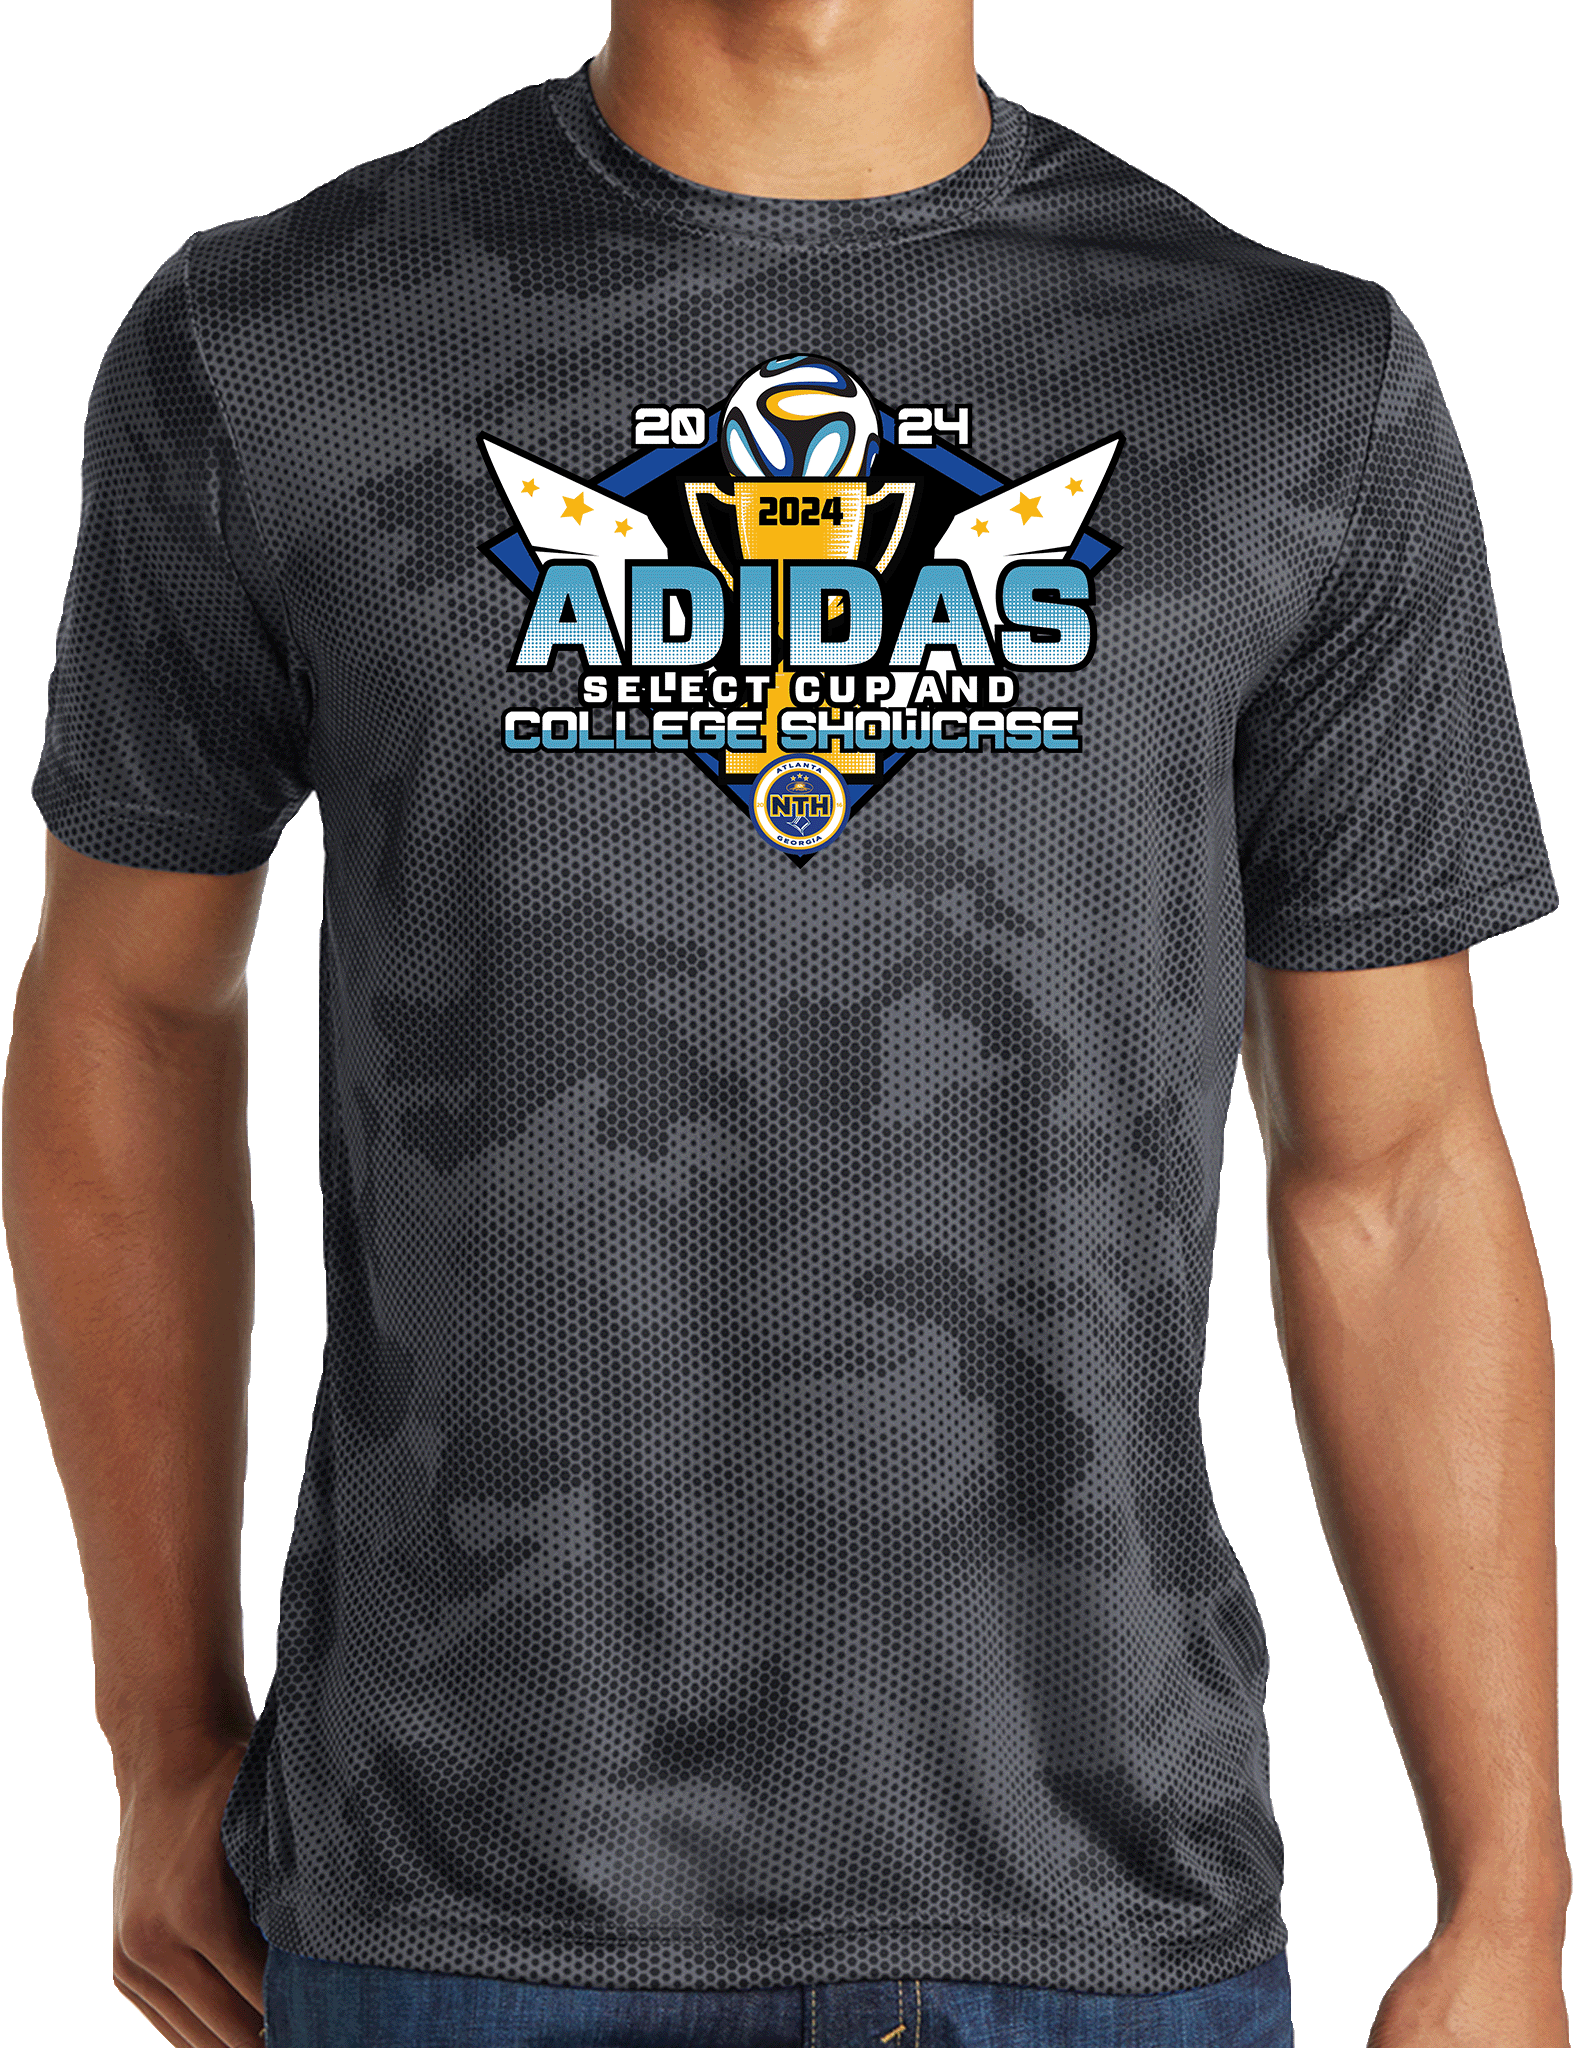 Performance Shirts - 2024 NTH Adidas Select Cup and College Showcase